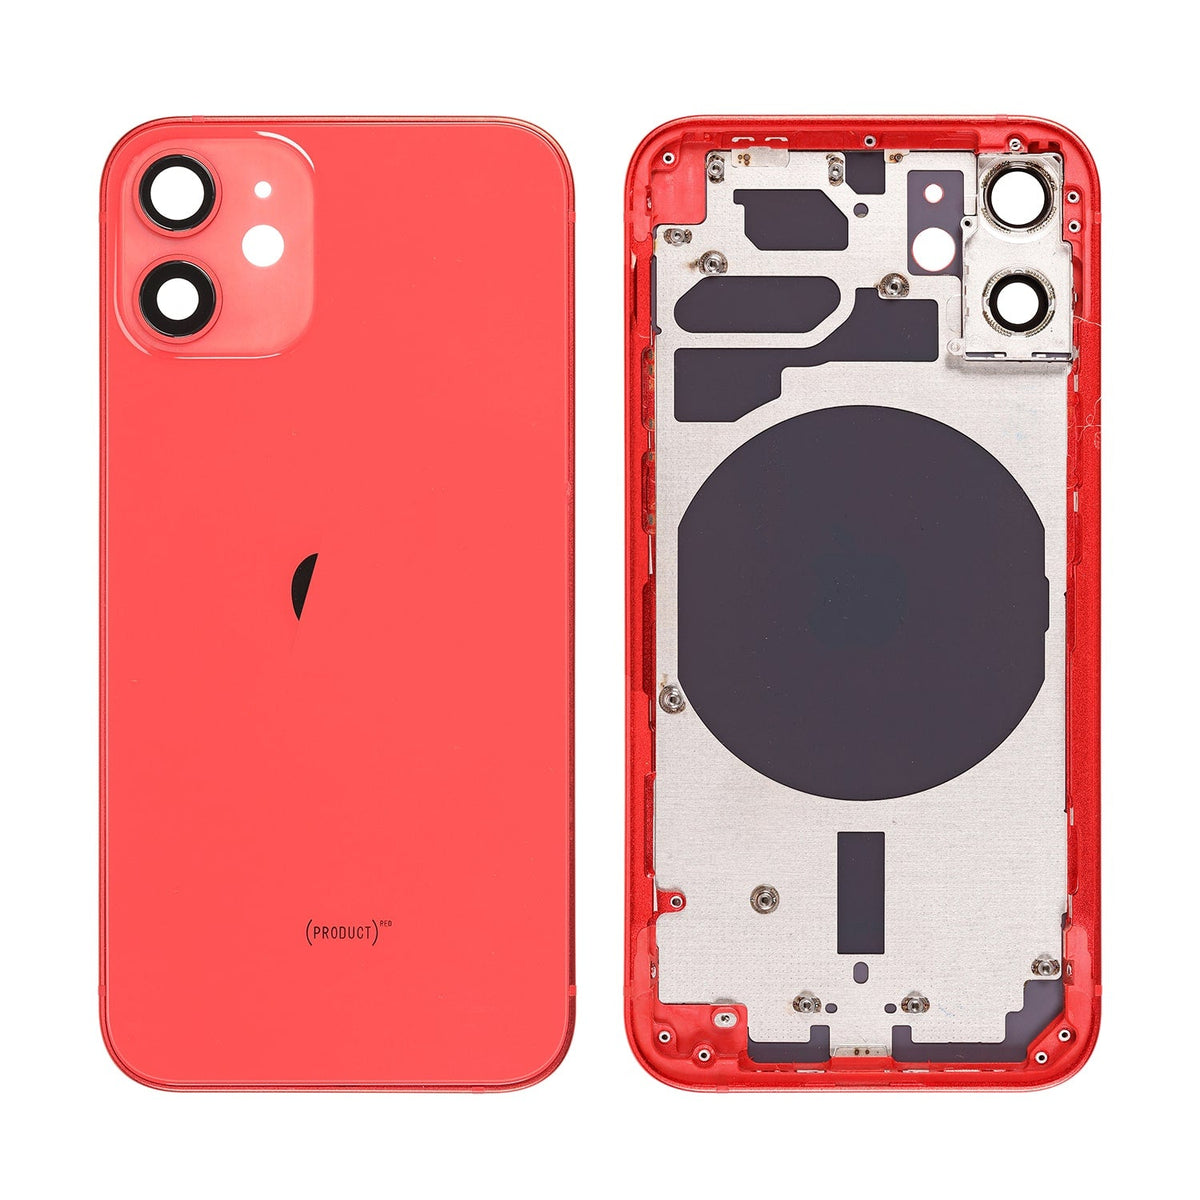 RED REAR HOUSING WITH FRAME FOR IPHONE 12 MINI